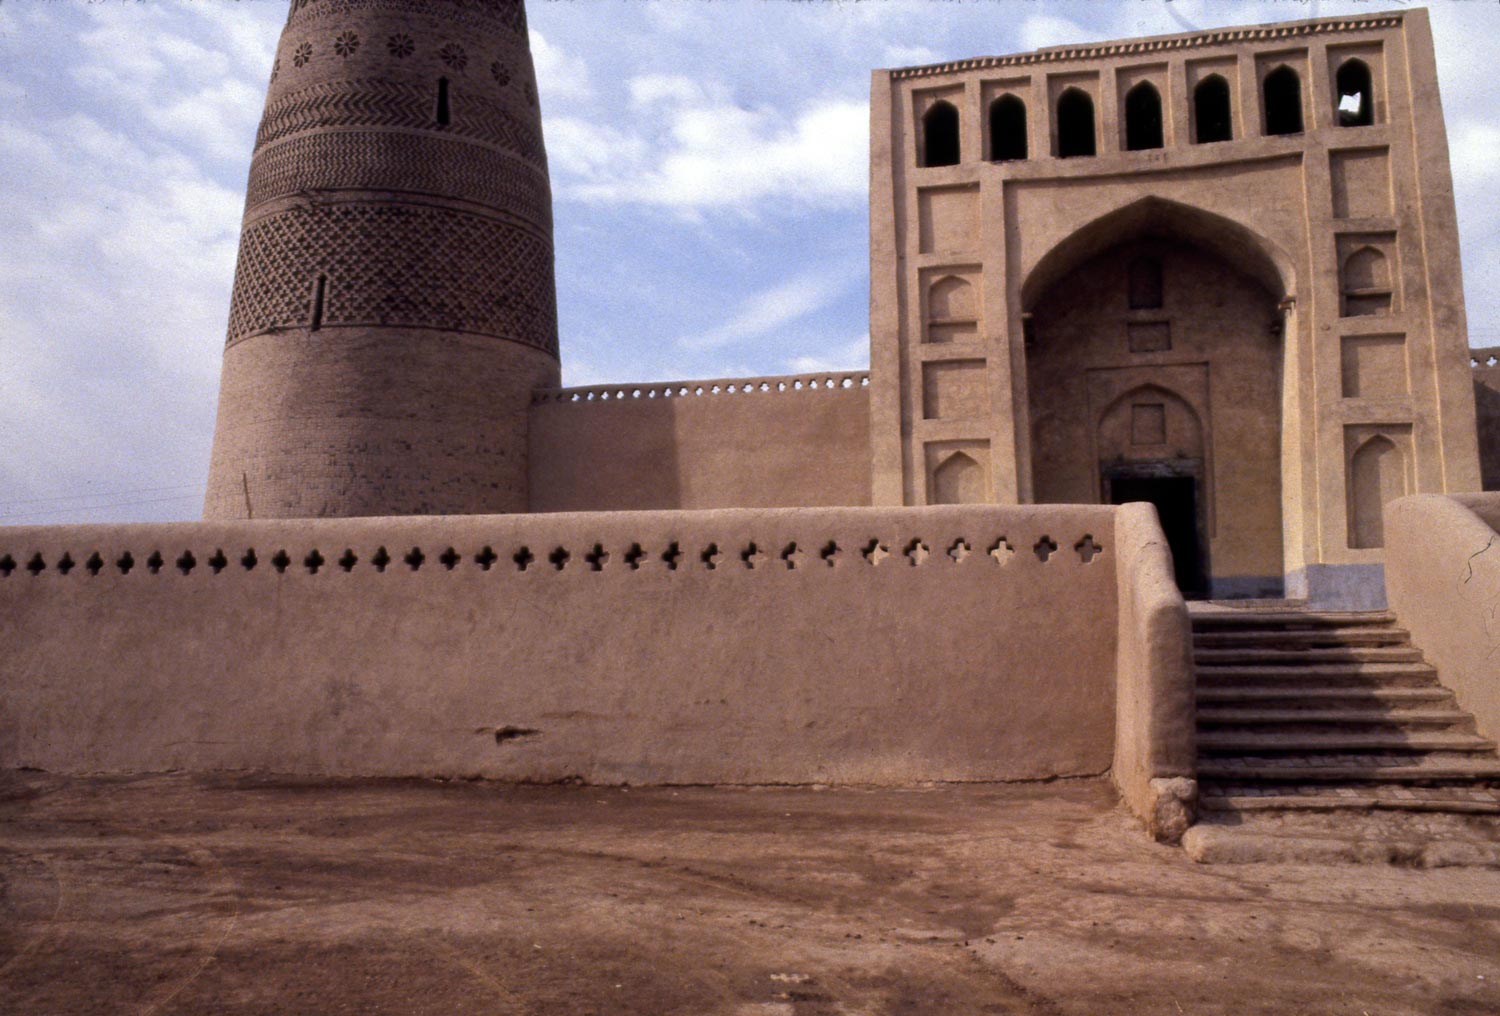 Steps leading up to terrace with mosque portal and minaret